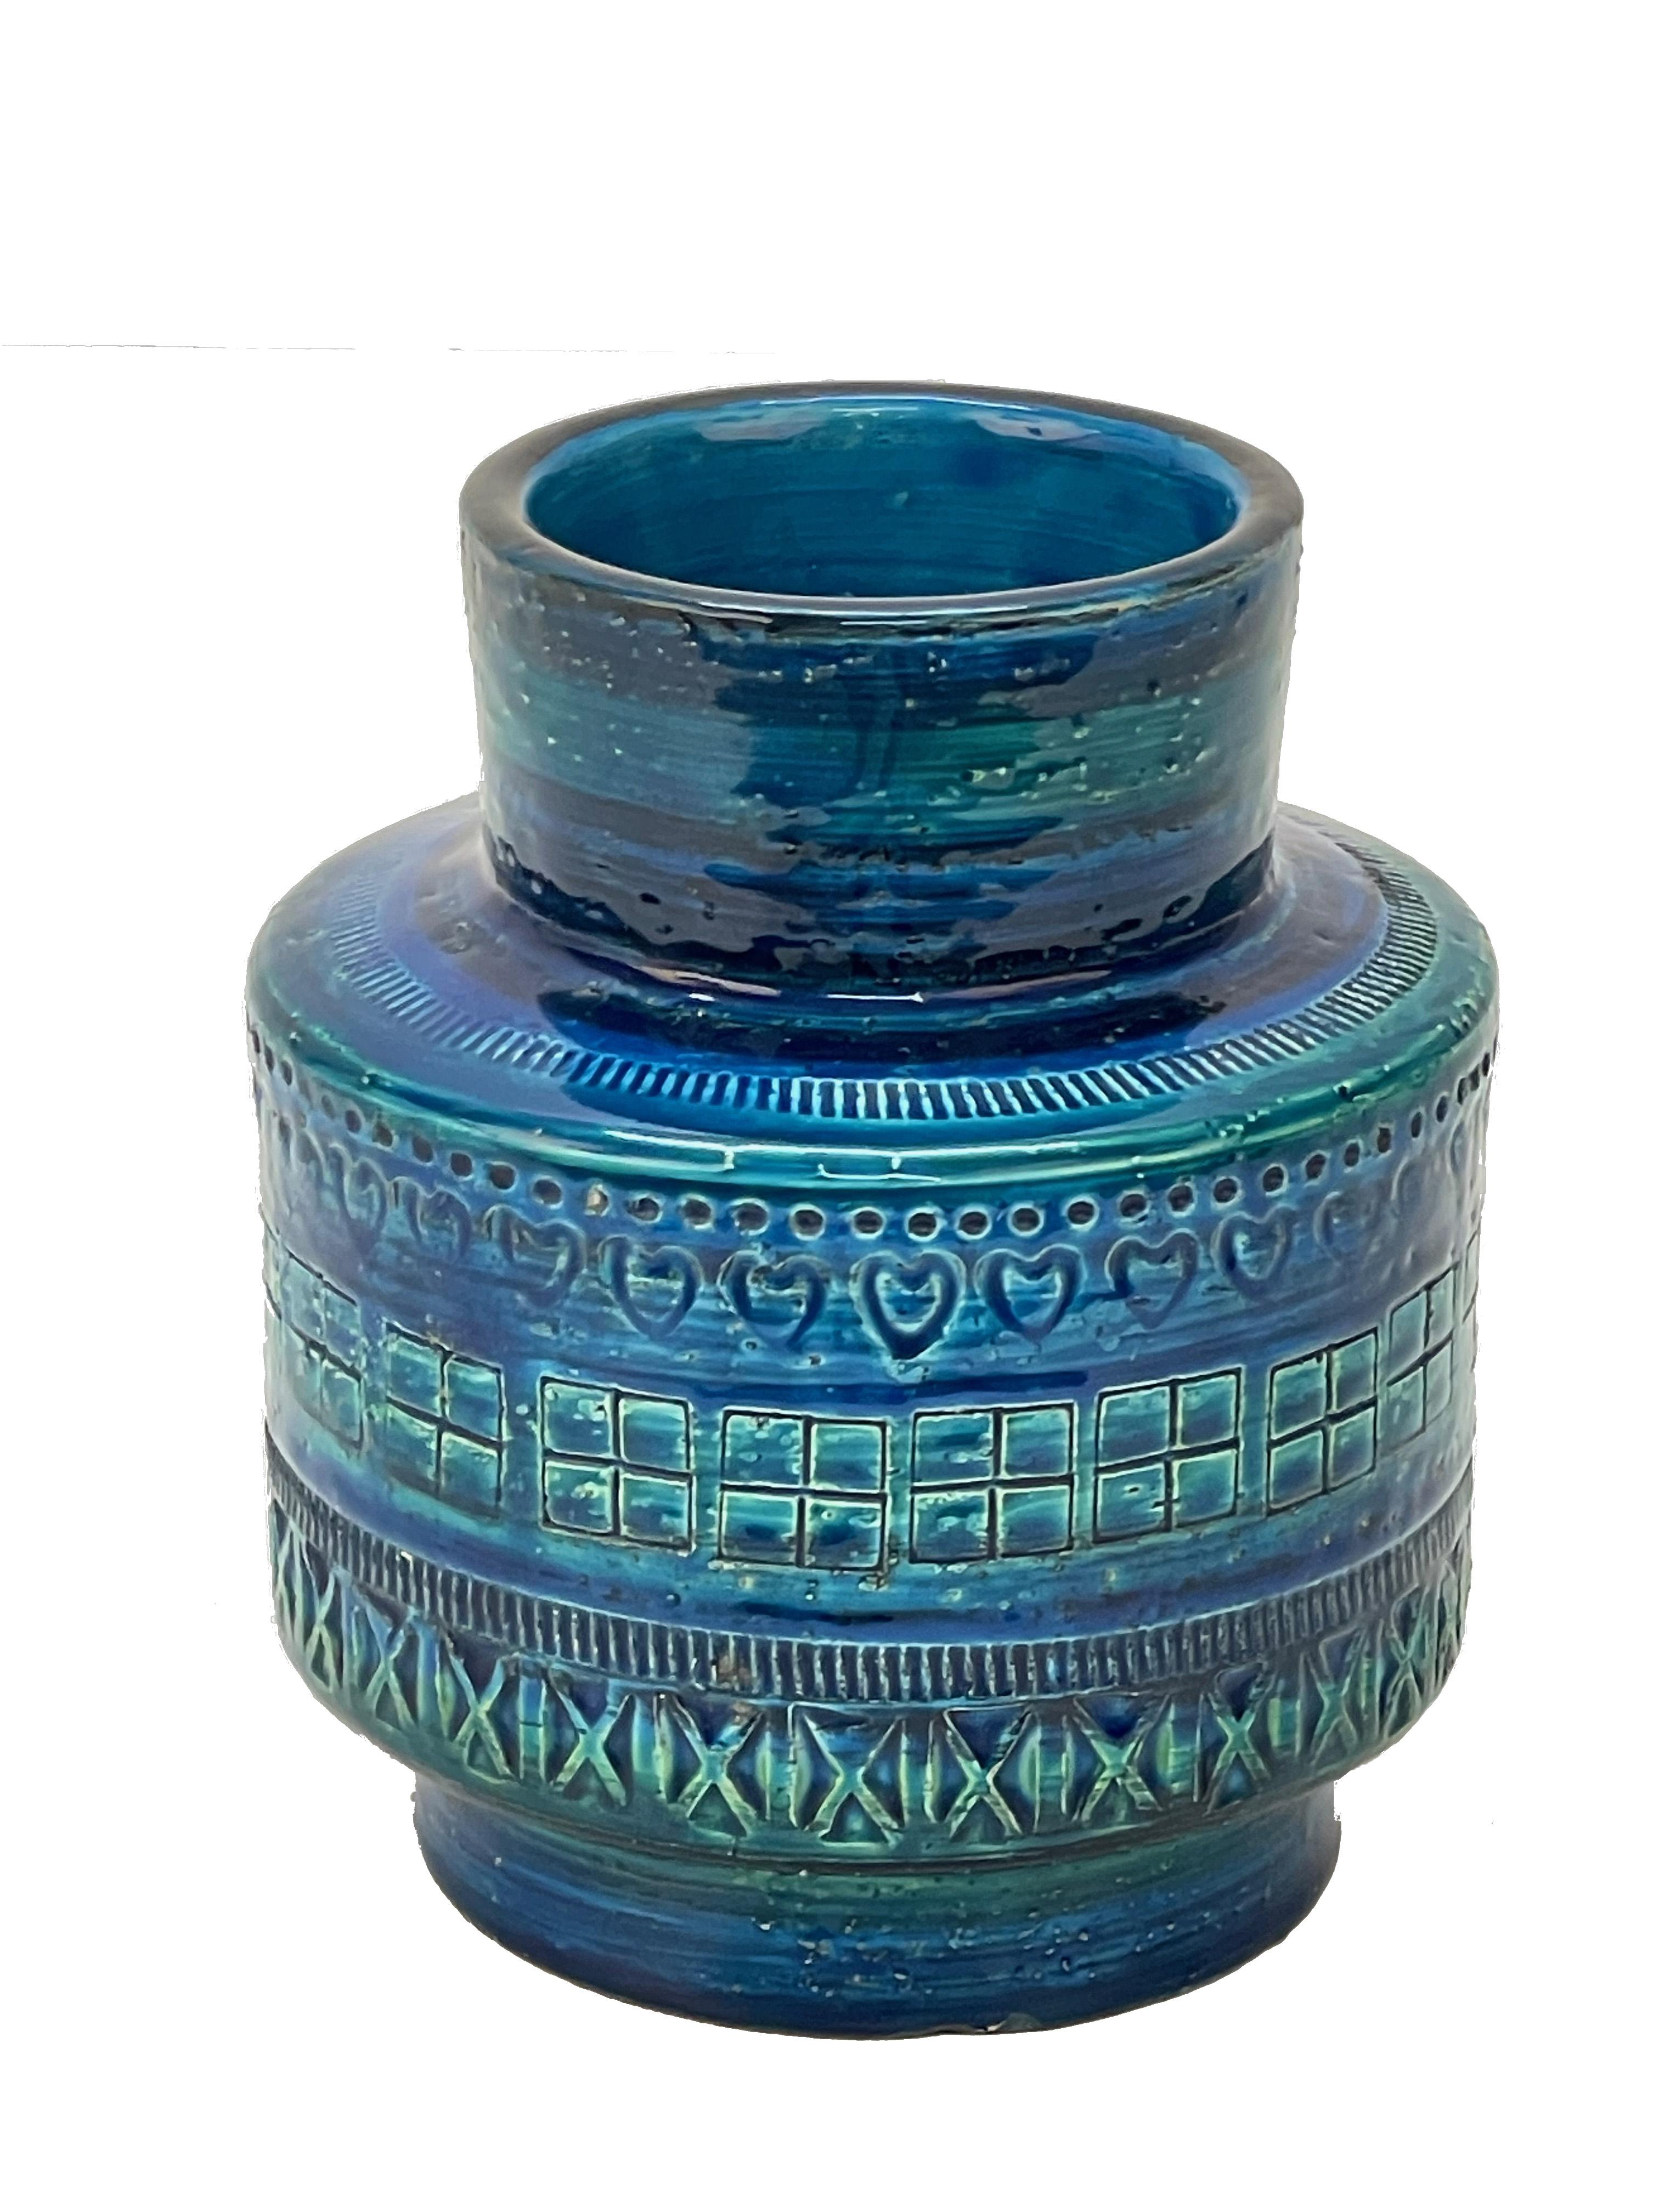 Amazing midcentury blue glazed terracotta ceramic vase. This fantastic item was designed by Aldo Londi for Bitossi in Rimini, Italy, during the late 1950s or early 1960s.

This magnificent piece was handcrafted in Italy with a hand-carved